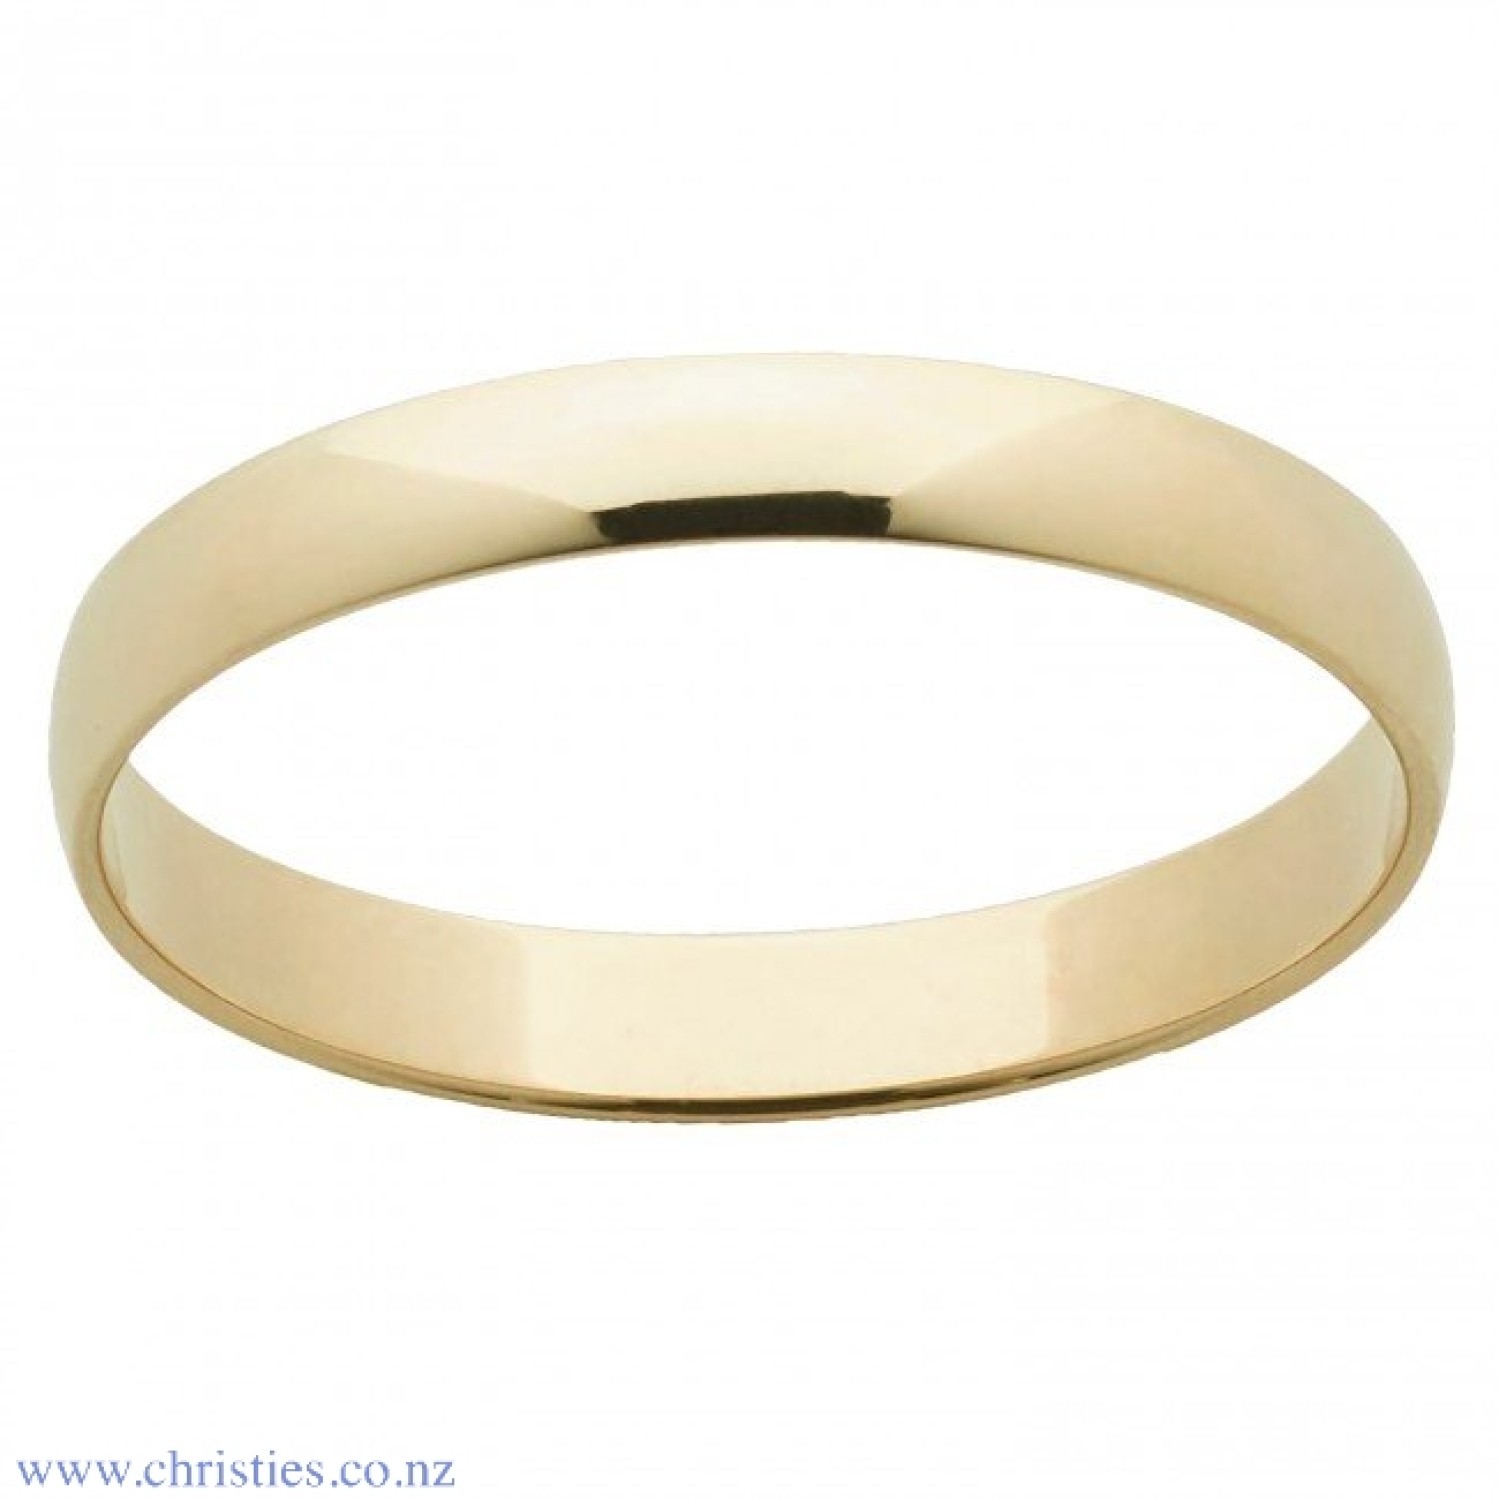 9ct Yellow Gold Wedding Ring. A 9ct Yellow Gold Wedding Ring 3.5mm in width Humm -Buy Little things up to $1000 and choose 10 weekly or 5 fortnightly payments with no interest. Late payment fee of $10 will apply. Thickness: 0.9mm Wid @christies.online